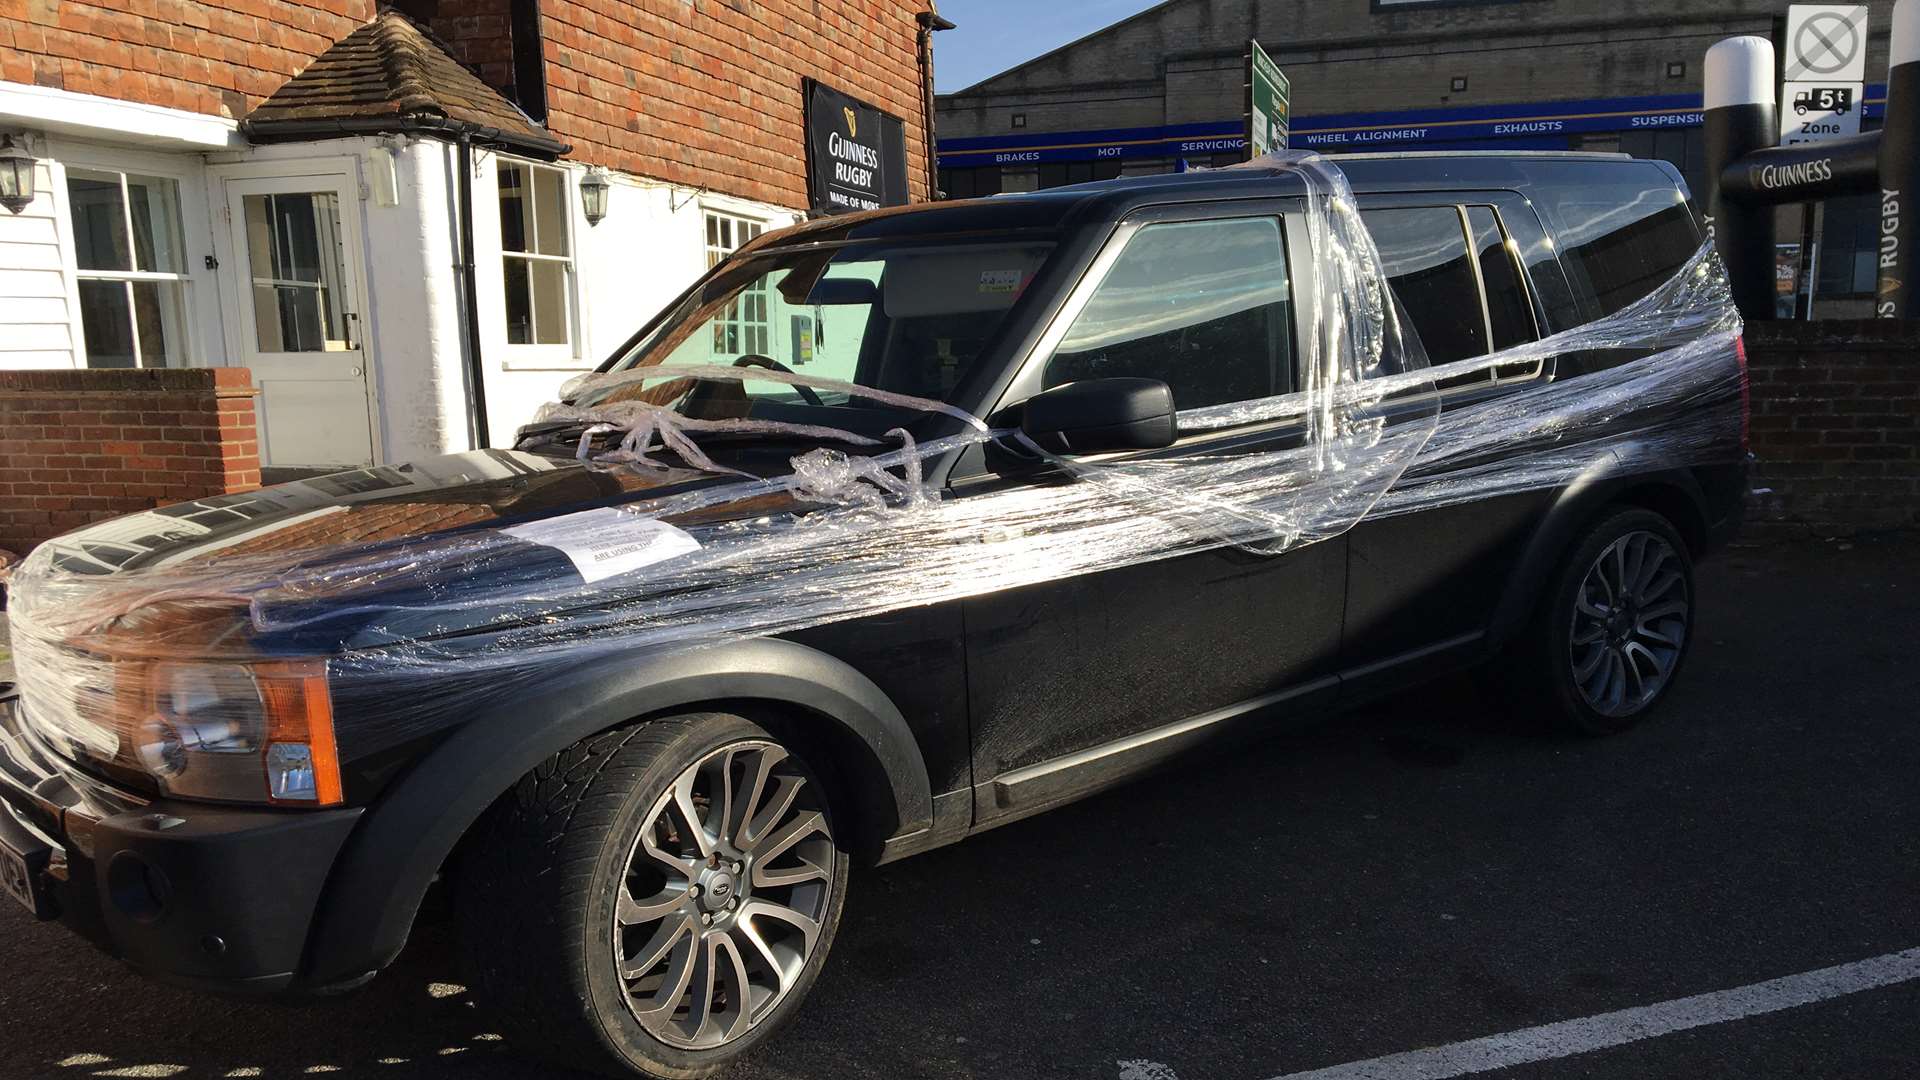 The cling filmed car was apparently a practical joke between bar staff and customers